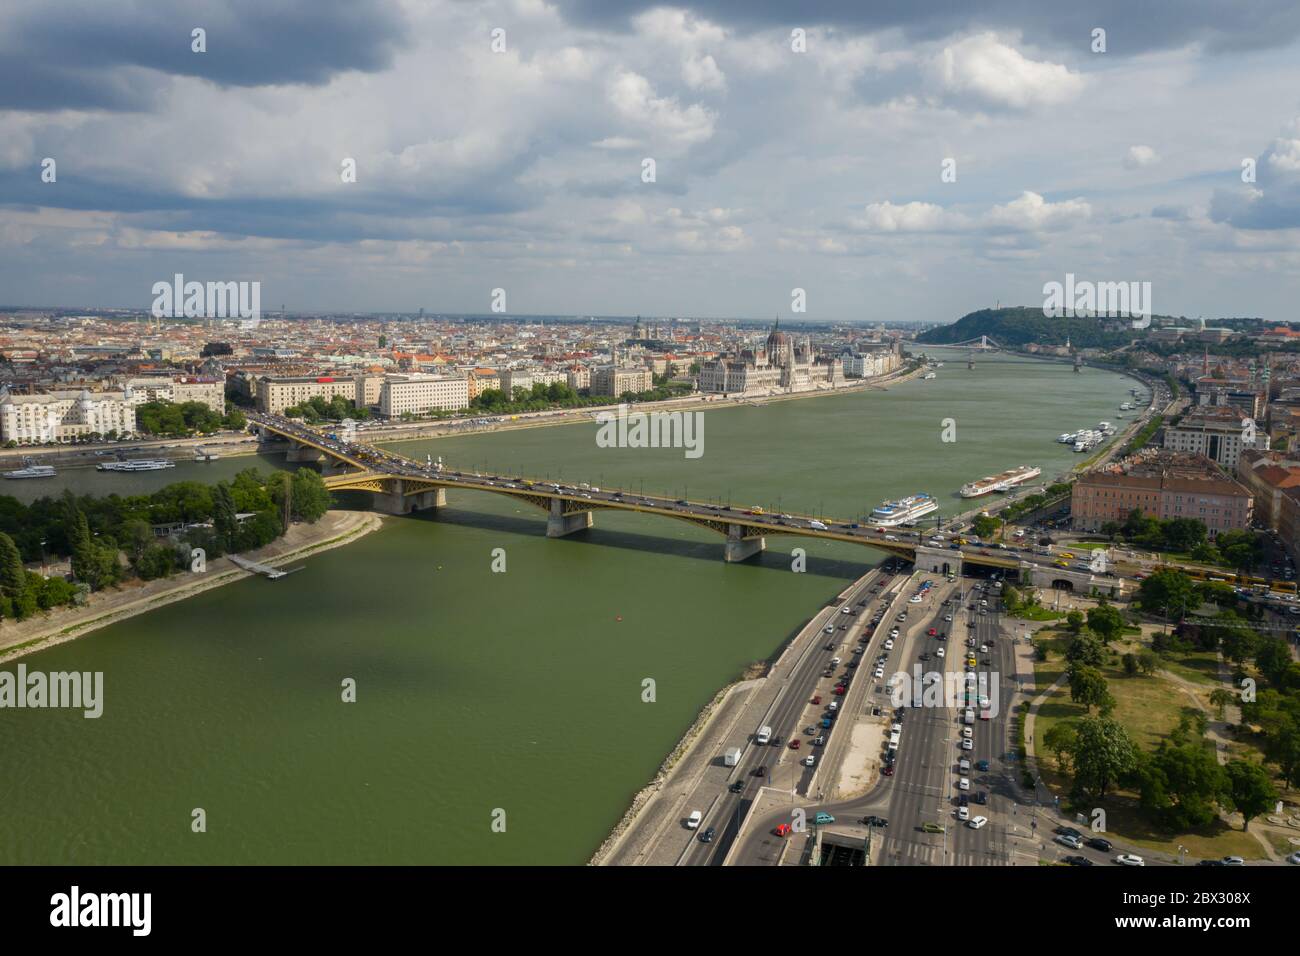 Budapest, Hungary - June 4, 2020: On the 100th anniversary of the Treaty of Trianon, traffic stopped for a minute. Stock Photo